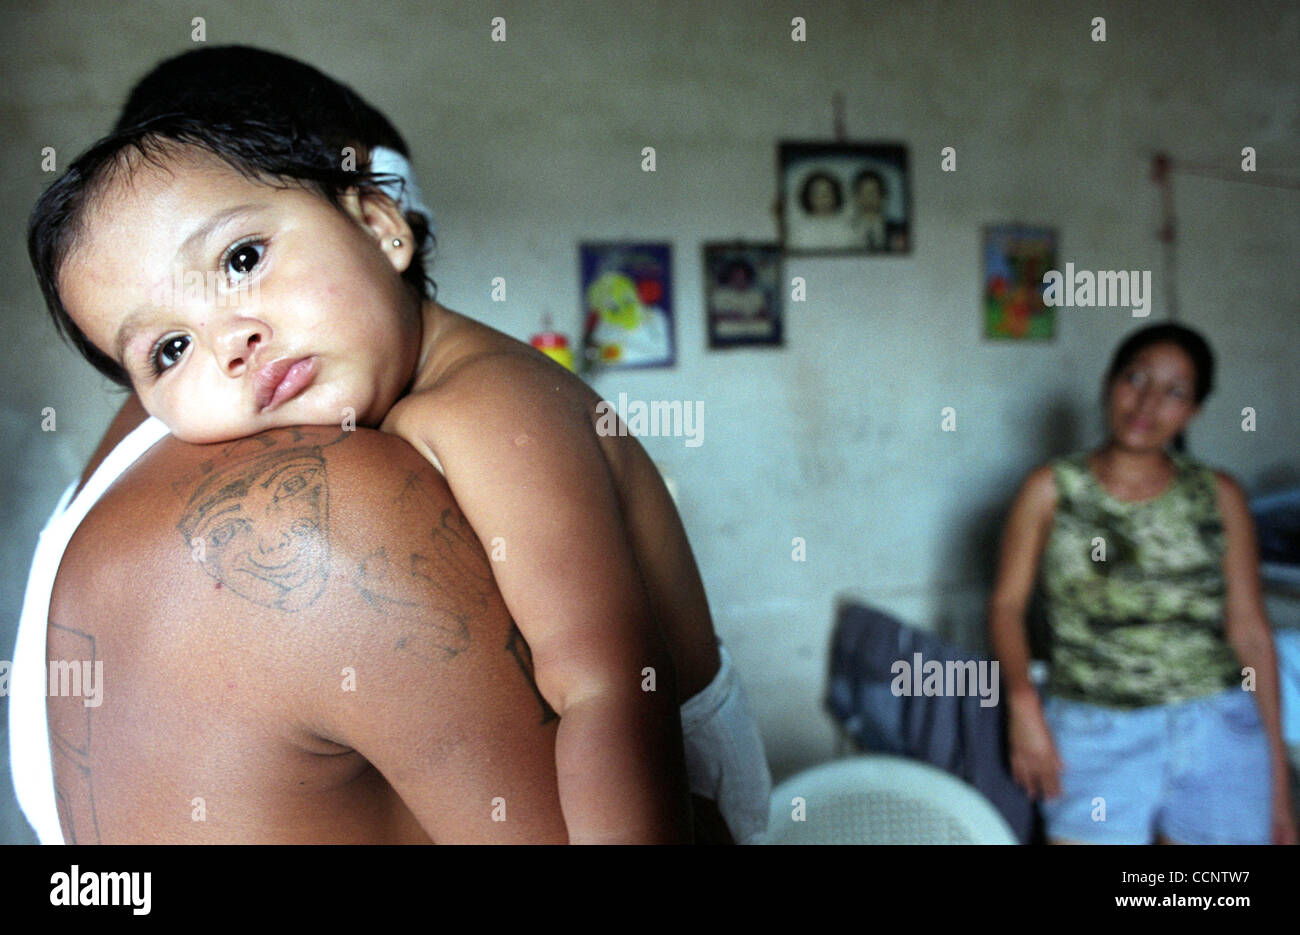 Former Mara Salvatrucha 13 gang member Christian Antunez, 23, hugs his 18-month-old daughter, Jeslin, in the room he shares with his wife, Angelina Matta in San Pedro Sula, Honduras.  Photographer:  Luis J. Jimenez City: San Pedro Sula Country: Honduras Date: June 10, 2004 Stock Photo